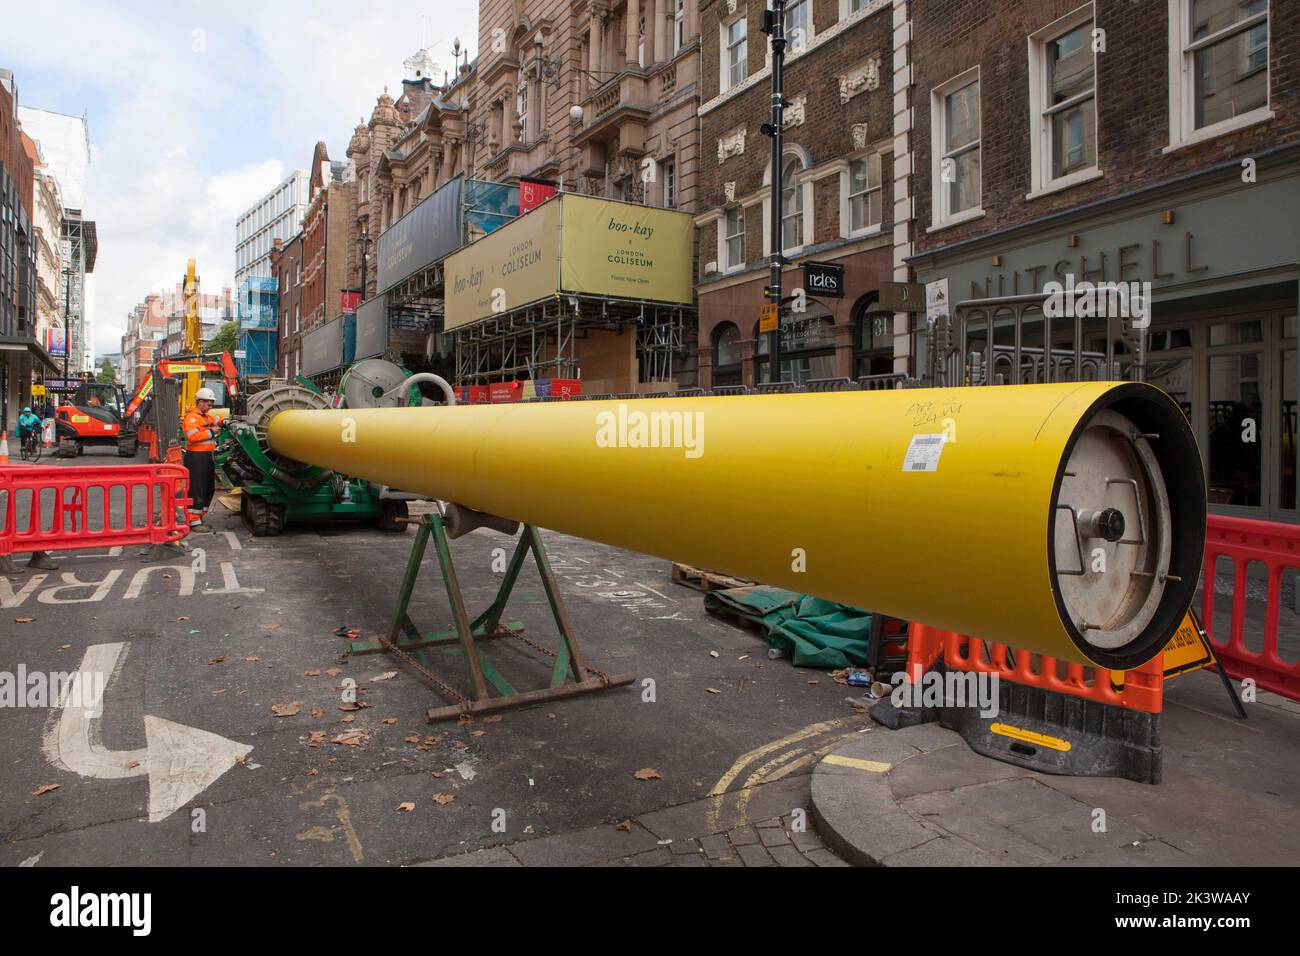 London, UK, 28 September 2022: Road works on St Martin's Lane where a gas main is being replaced. Anna Watson/Alamy Live News Stock Photo